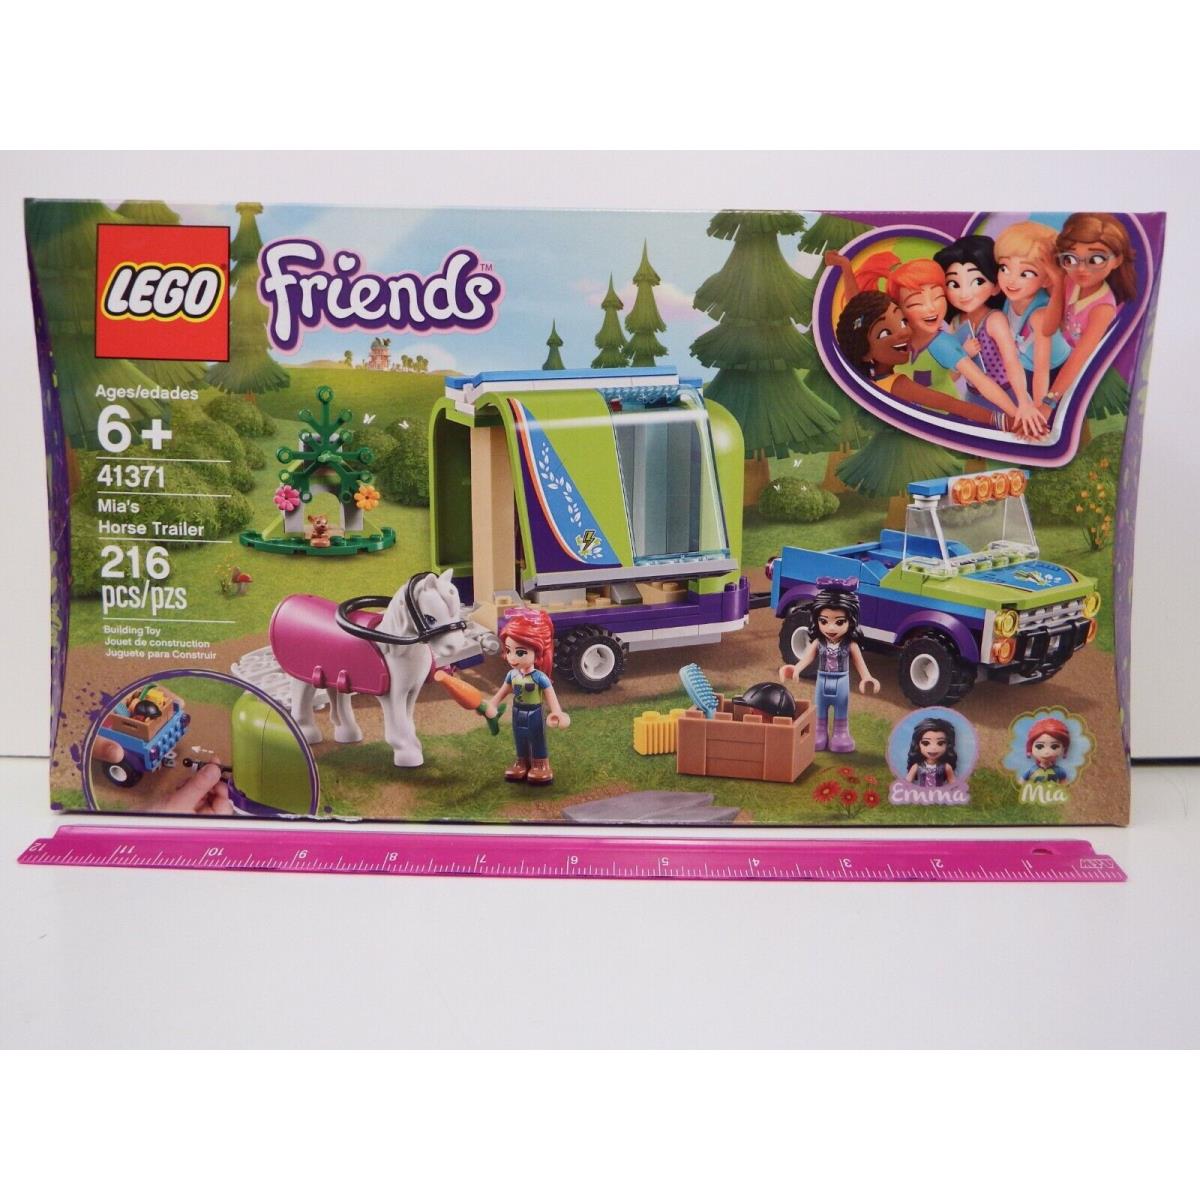 Lego - Friends 41371 Mia`s Horse Trailer - 216 Piece Set - Ages 6 - 12 Years